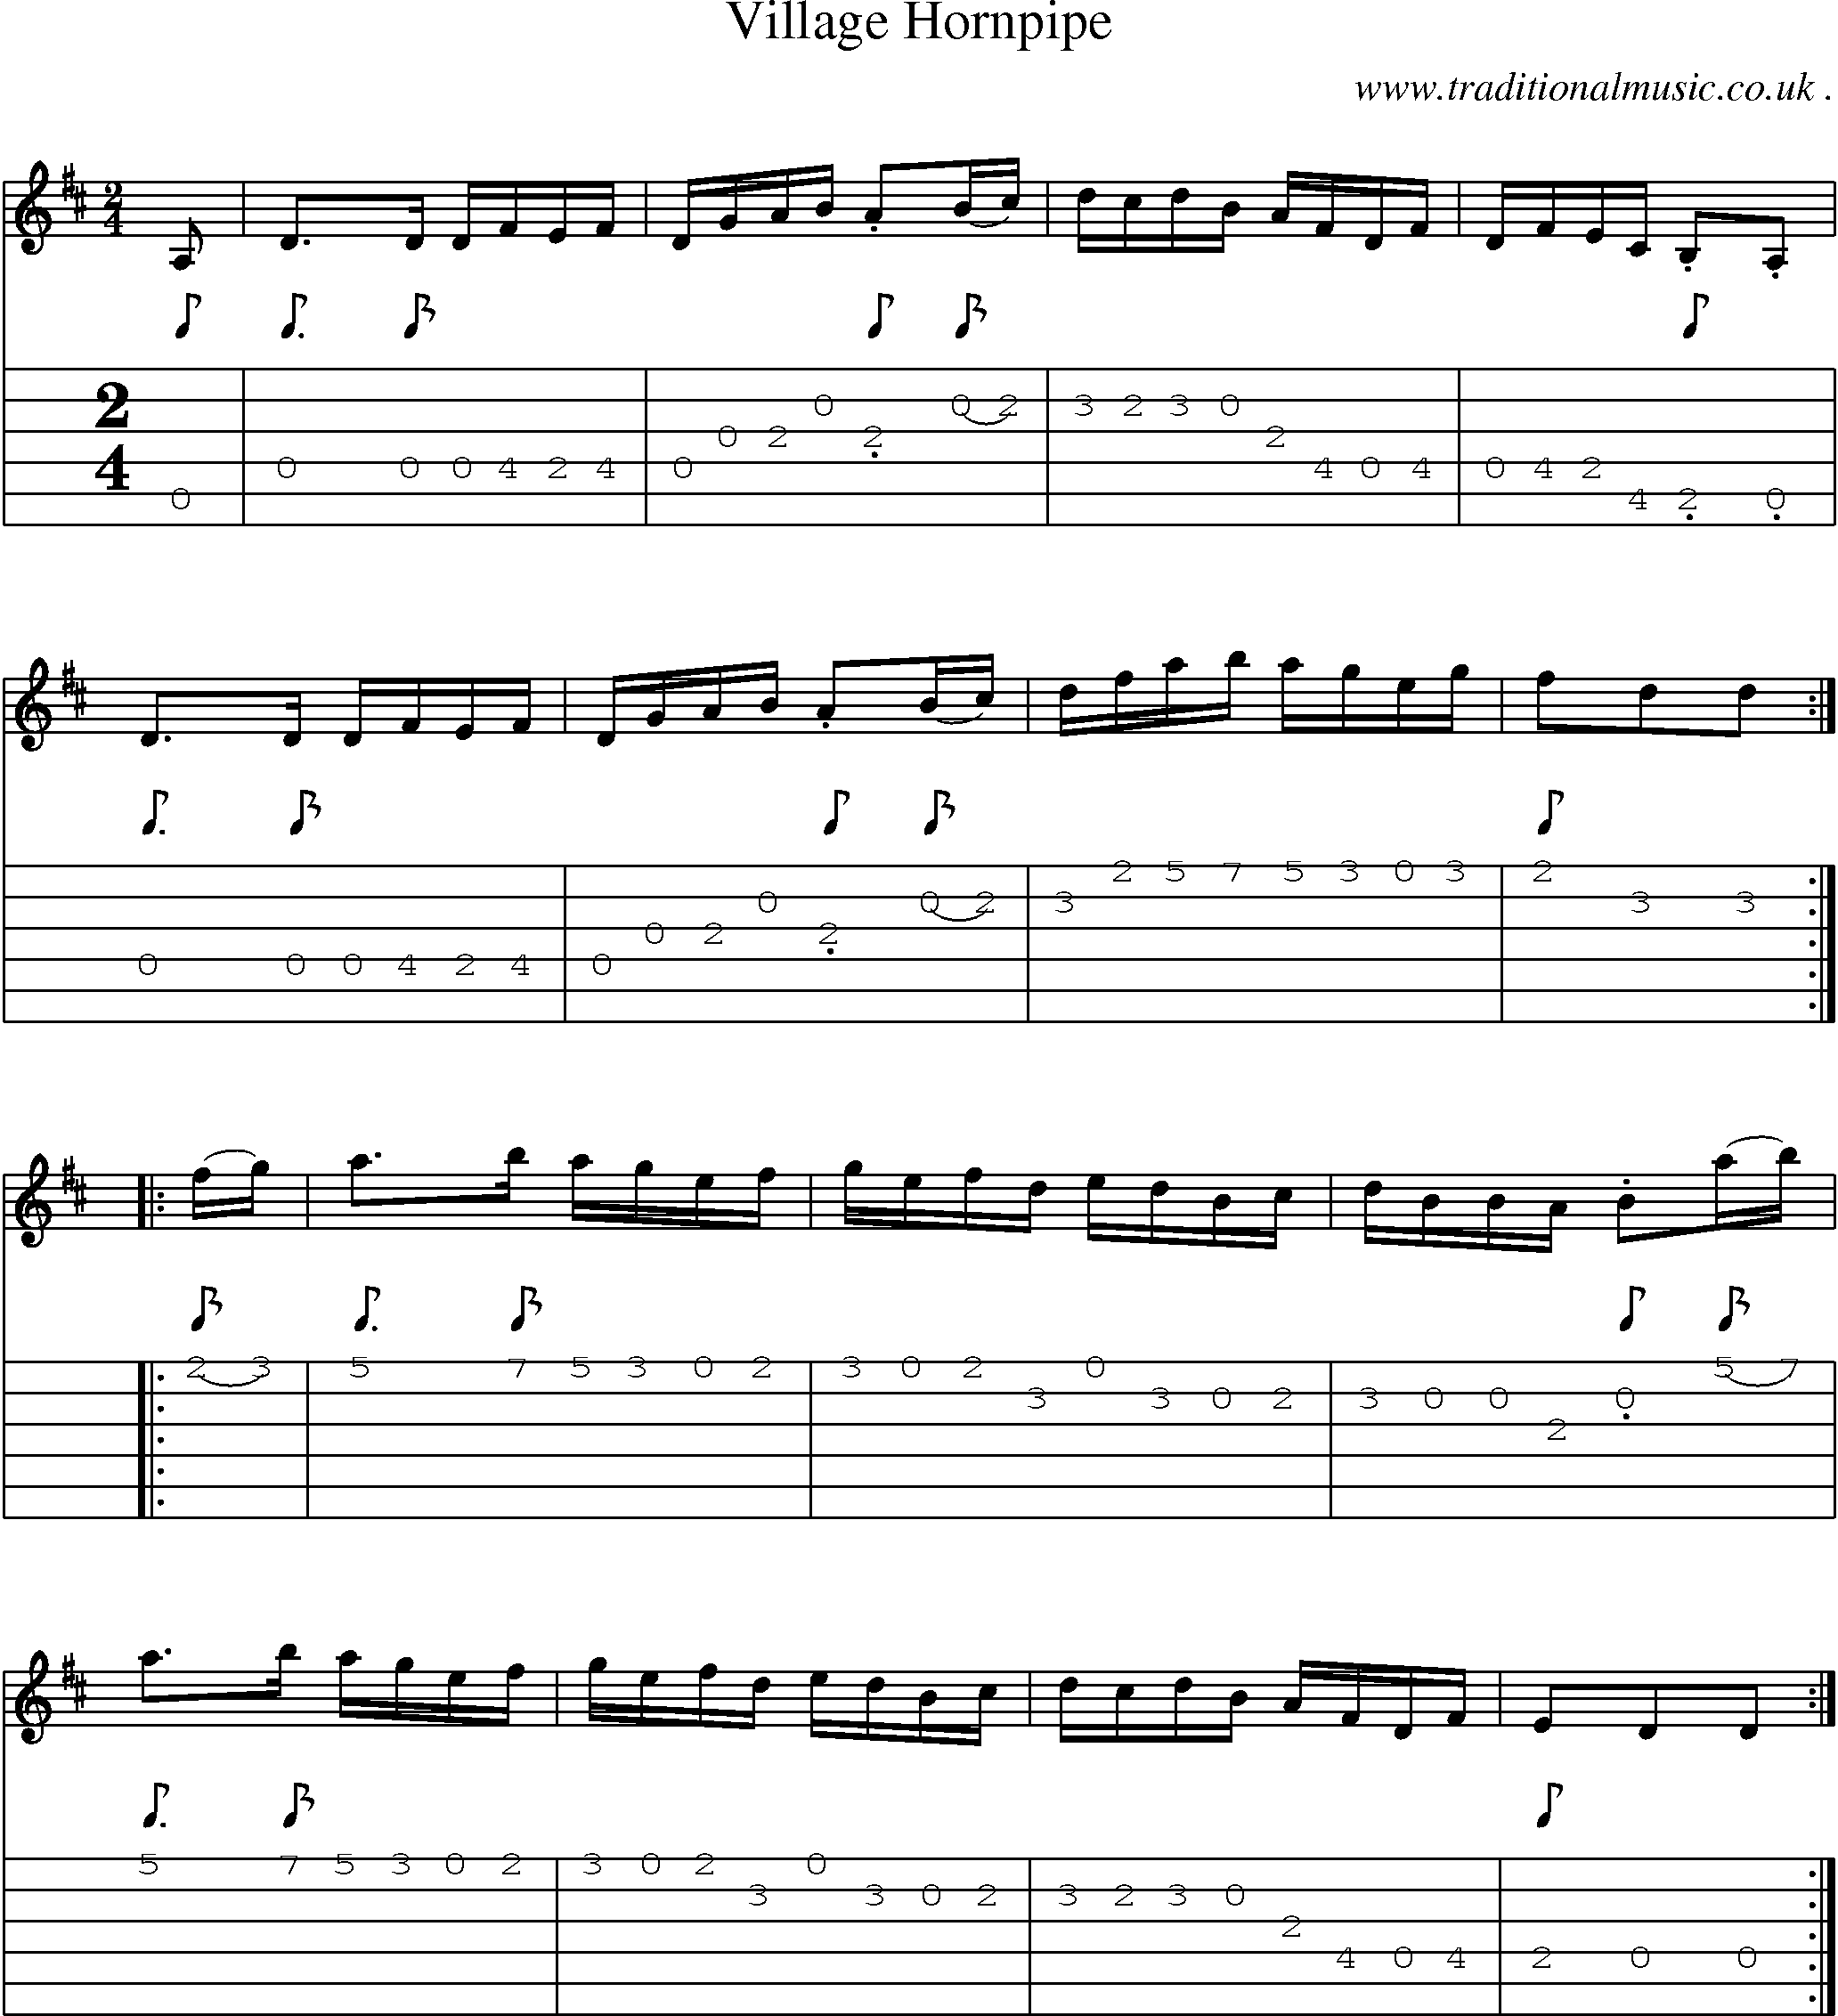 Sheet-Music and Guitar Tabs for Village Hornpipe